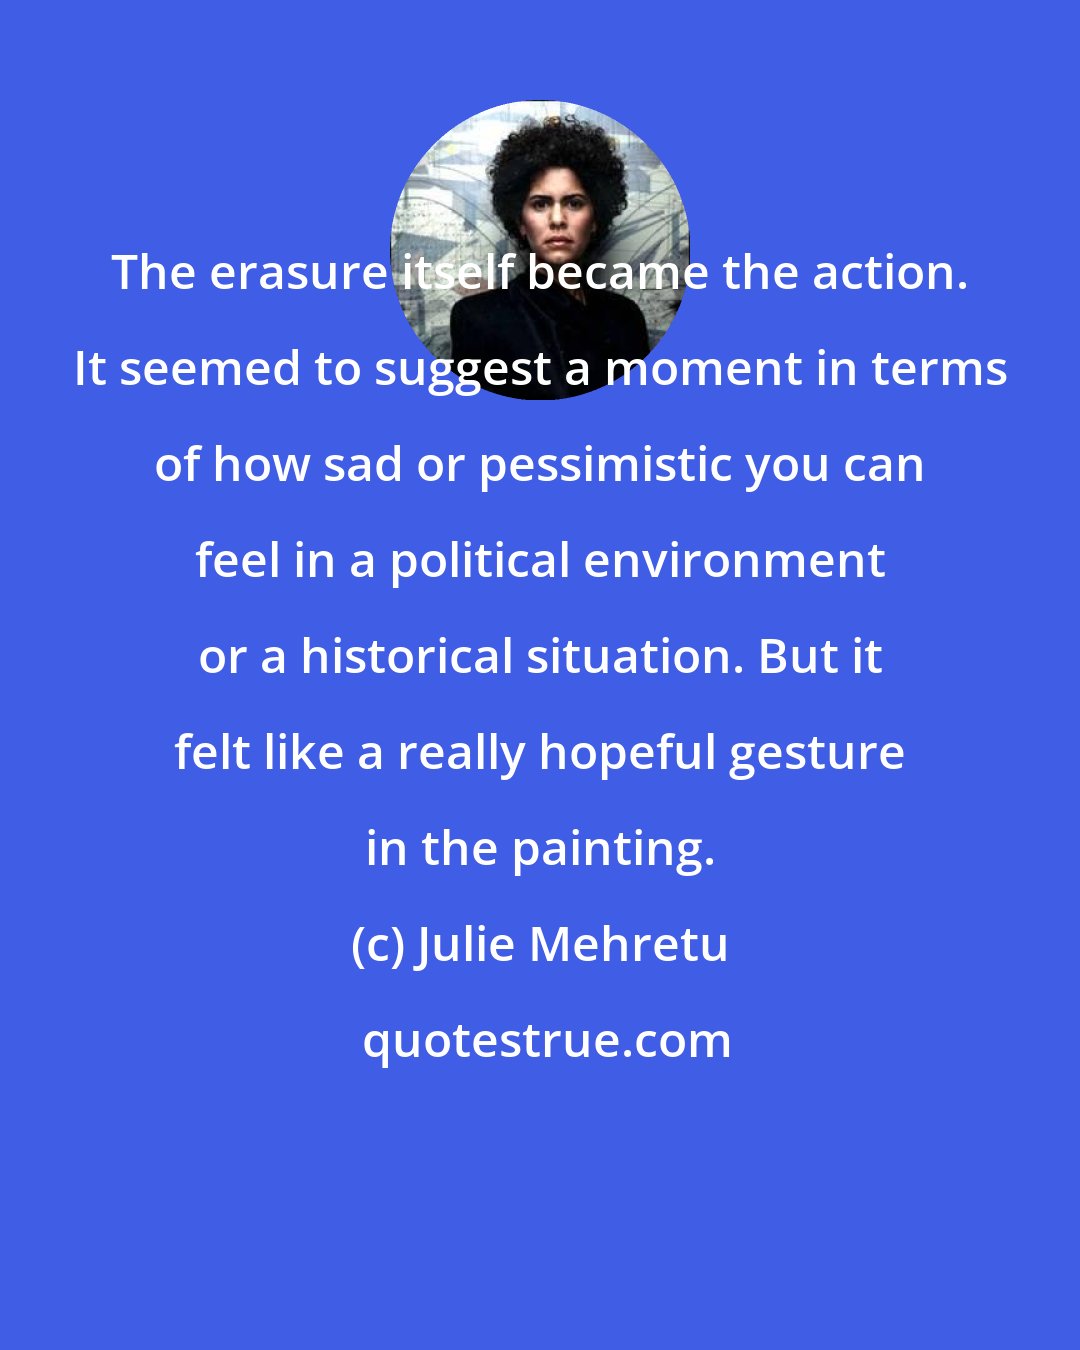 Julie Mehretu: The erasure itself became the action. It seemed to suggest a moment in terms of how sad or pessimistic you can feel in a political environment or a historical situation. But it felt like a really hopeful gesture in the painting.